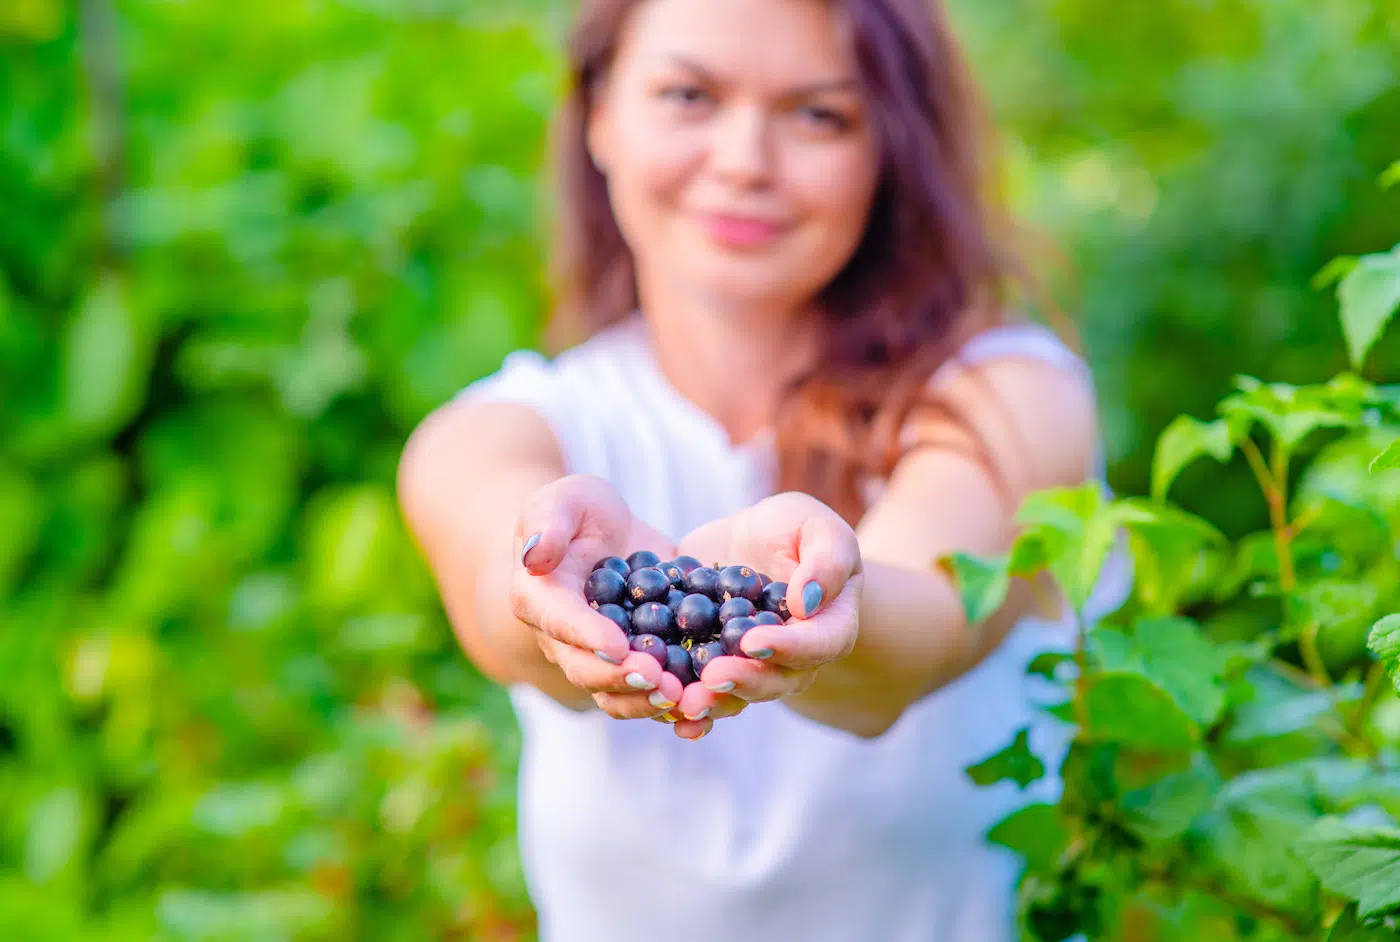 Farmer girl with a handful of blackcurrant berries